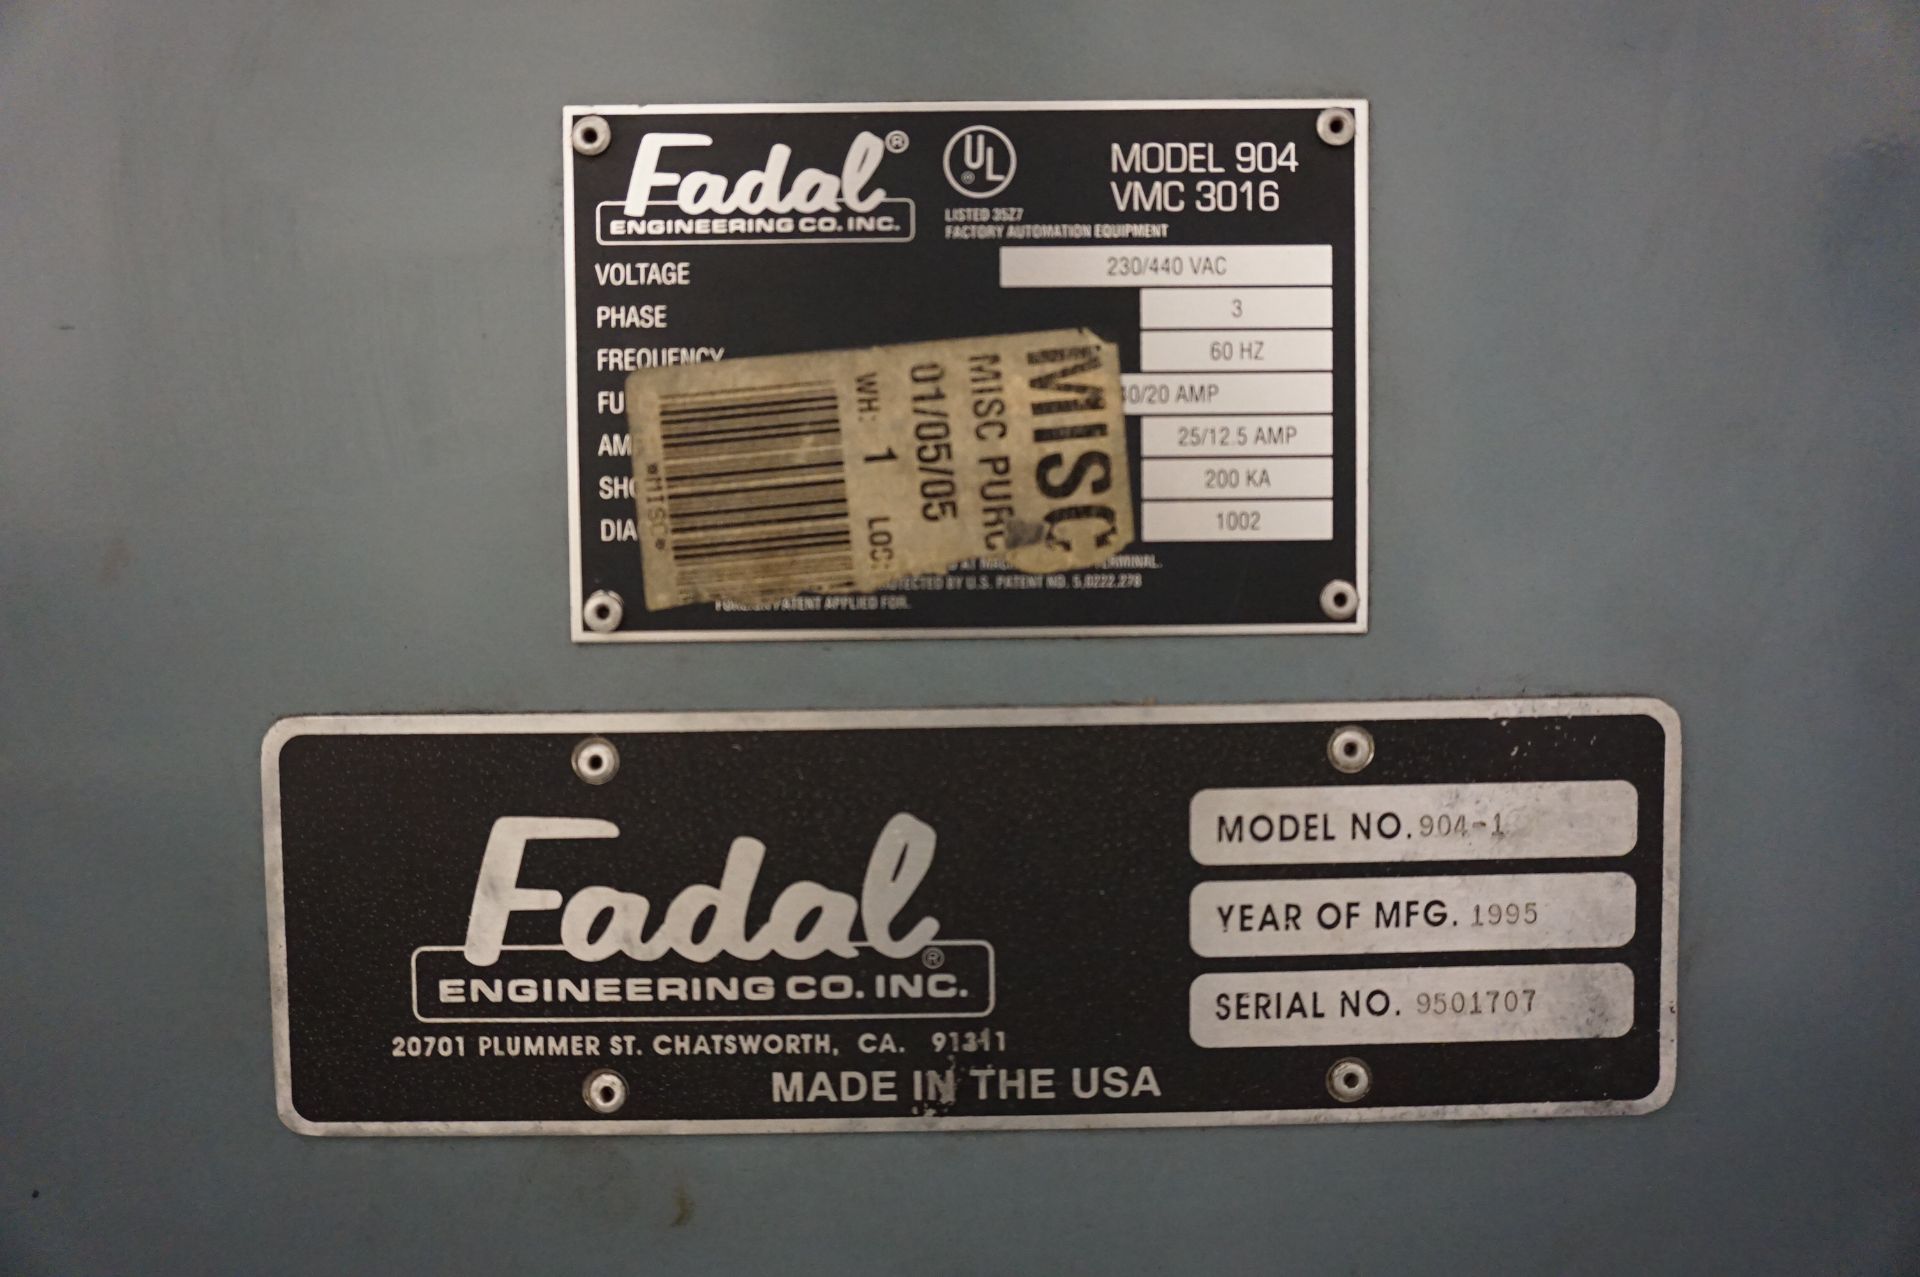 1995 FADAL VERTICAL MACHINING CENTER 3016 HT, S/N 9501703, 3 AXIS, WITH MANUALS - Image 11 of 12